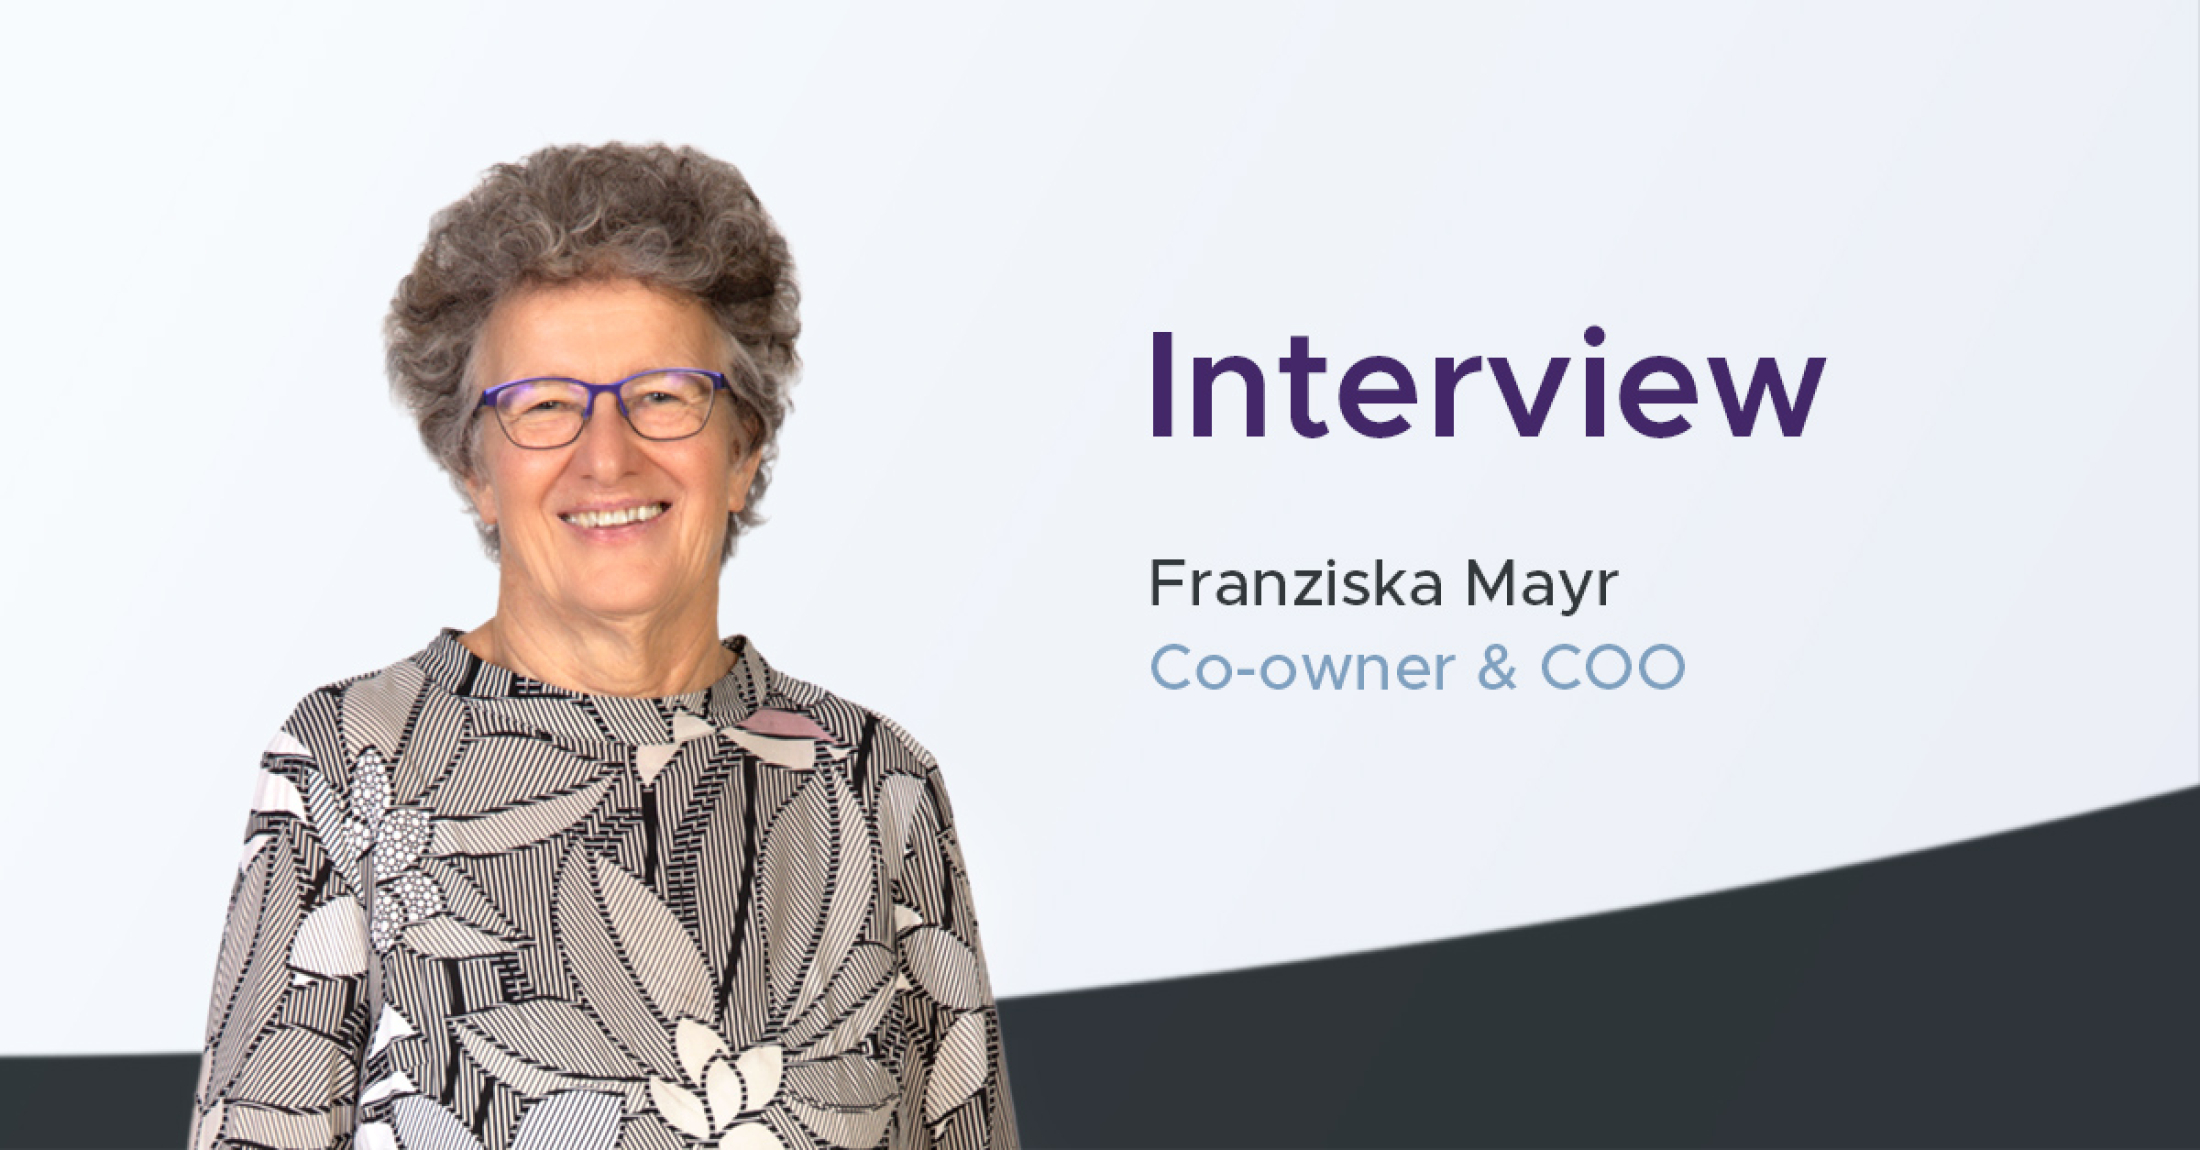 Interview – Franziska Mayr on entrepreneurship and risks in the software industry